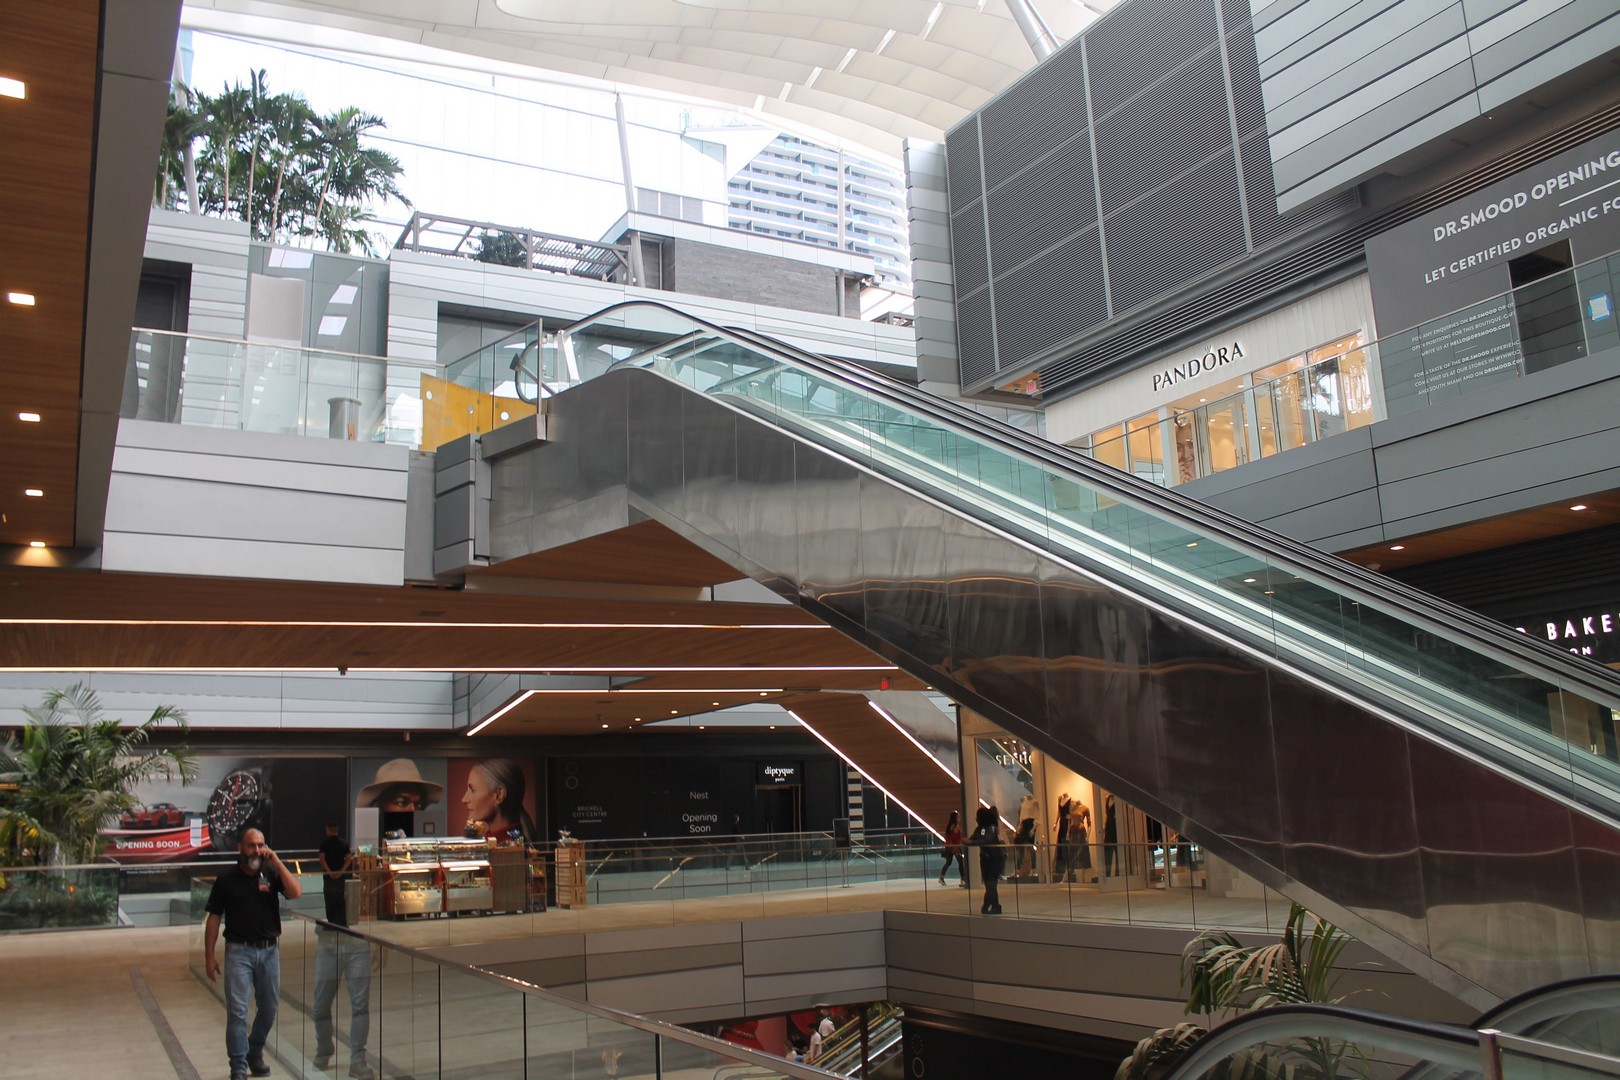 Brickell City Centre's newly opened retail area